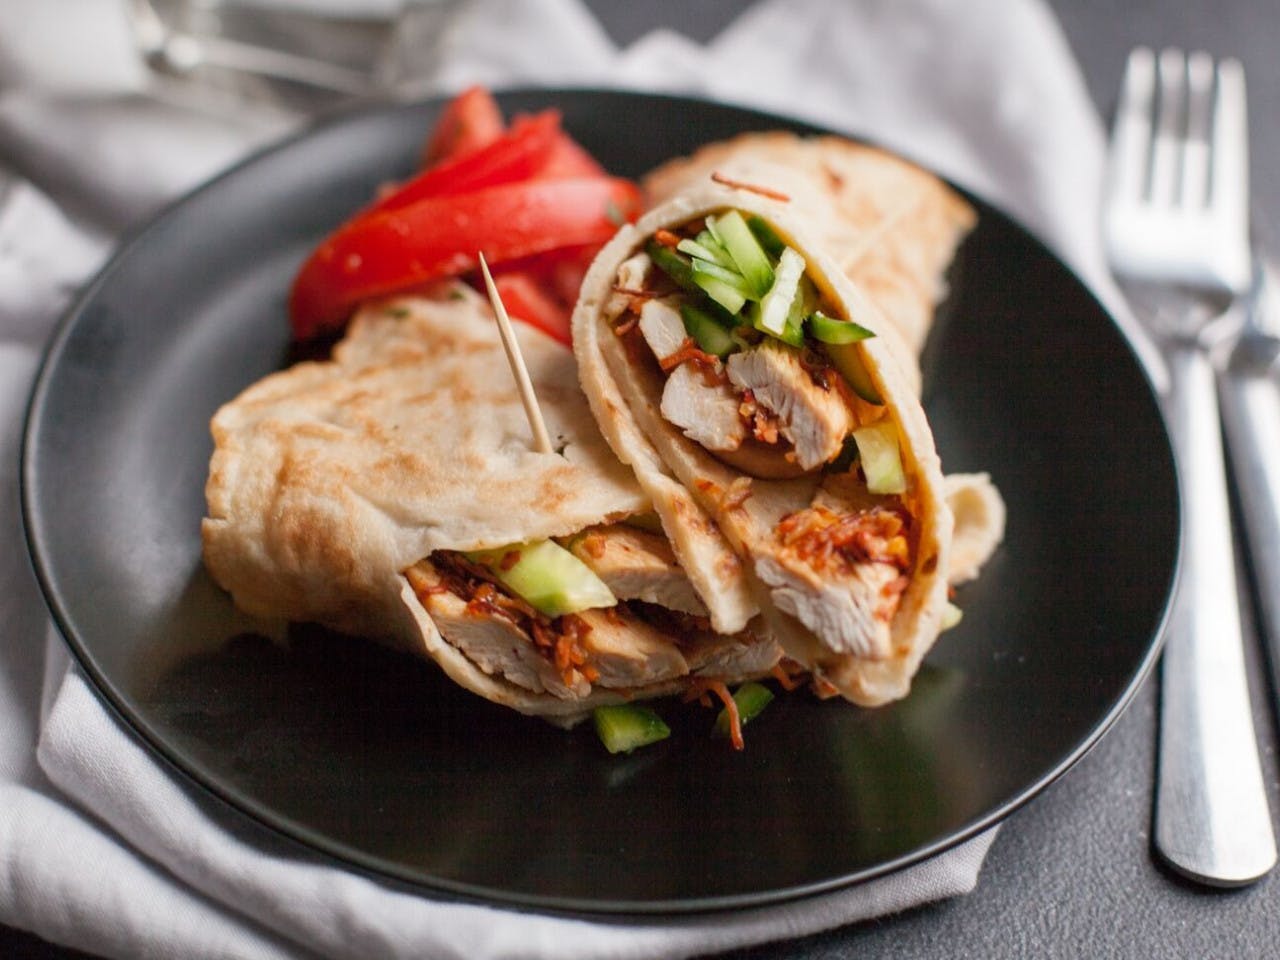 Spicy paleo wraps with chicken